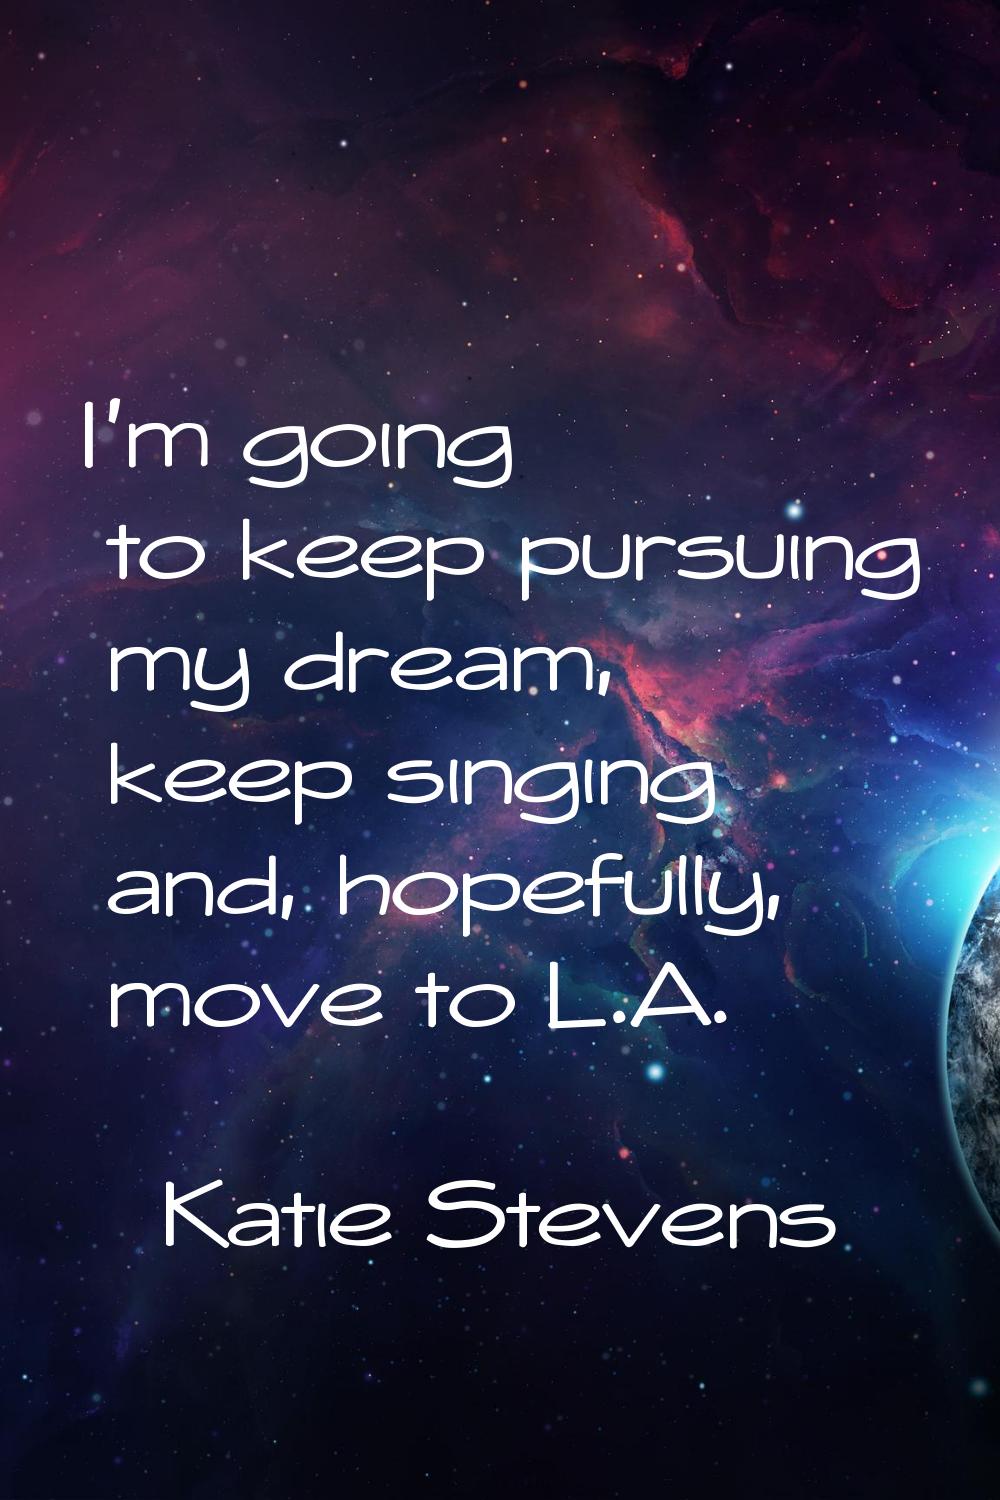 I'm going to keep pursuing my dream, keep singing and, hopefully, move to L.A.